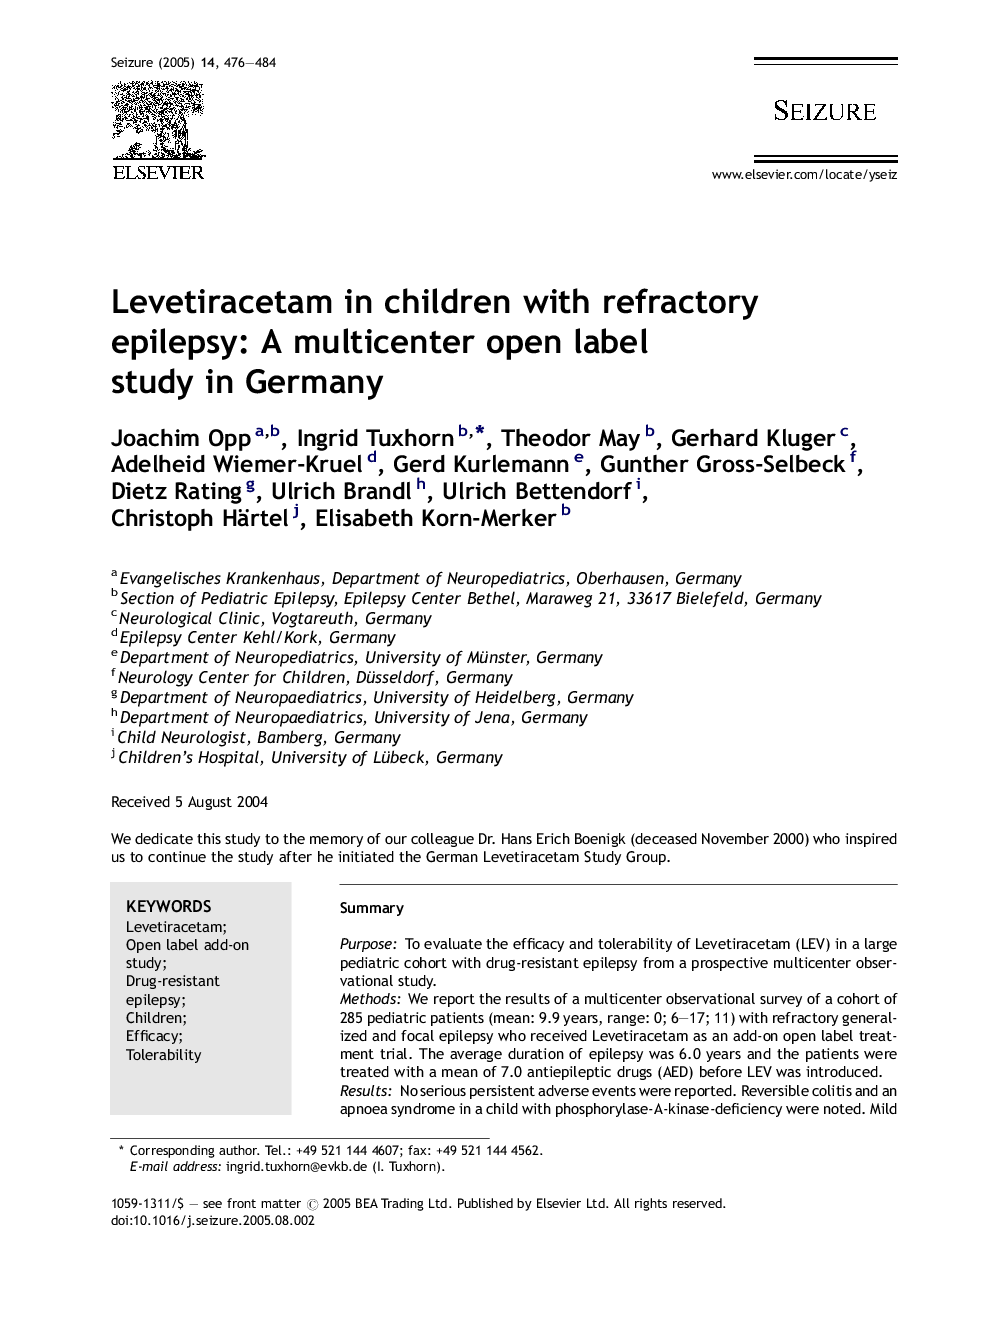 Levetiracetam in children with refractory epilepsy: A multicenter open label study in Germany